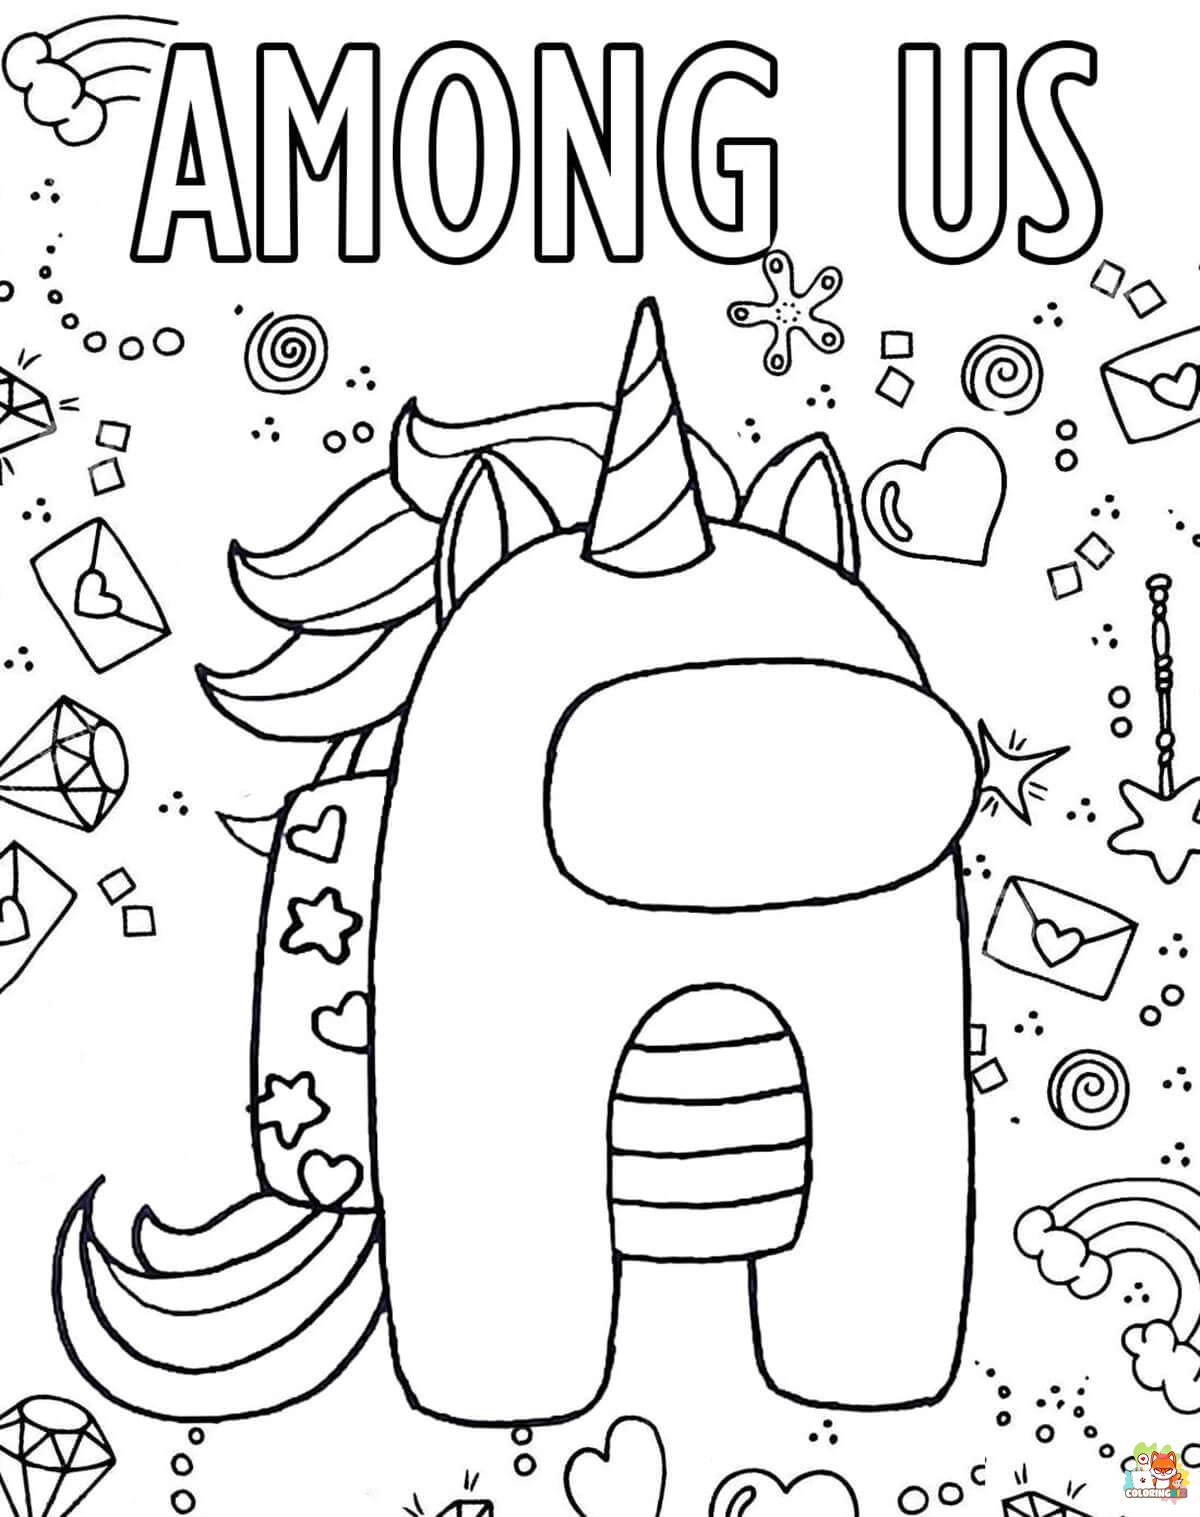 Among Us Unicorn Coloring Pages 1